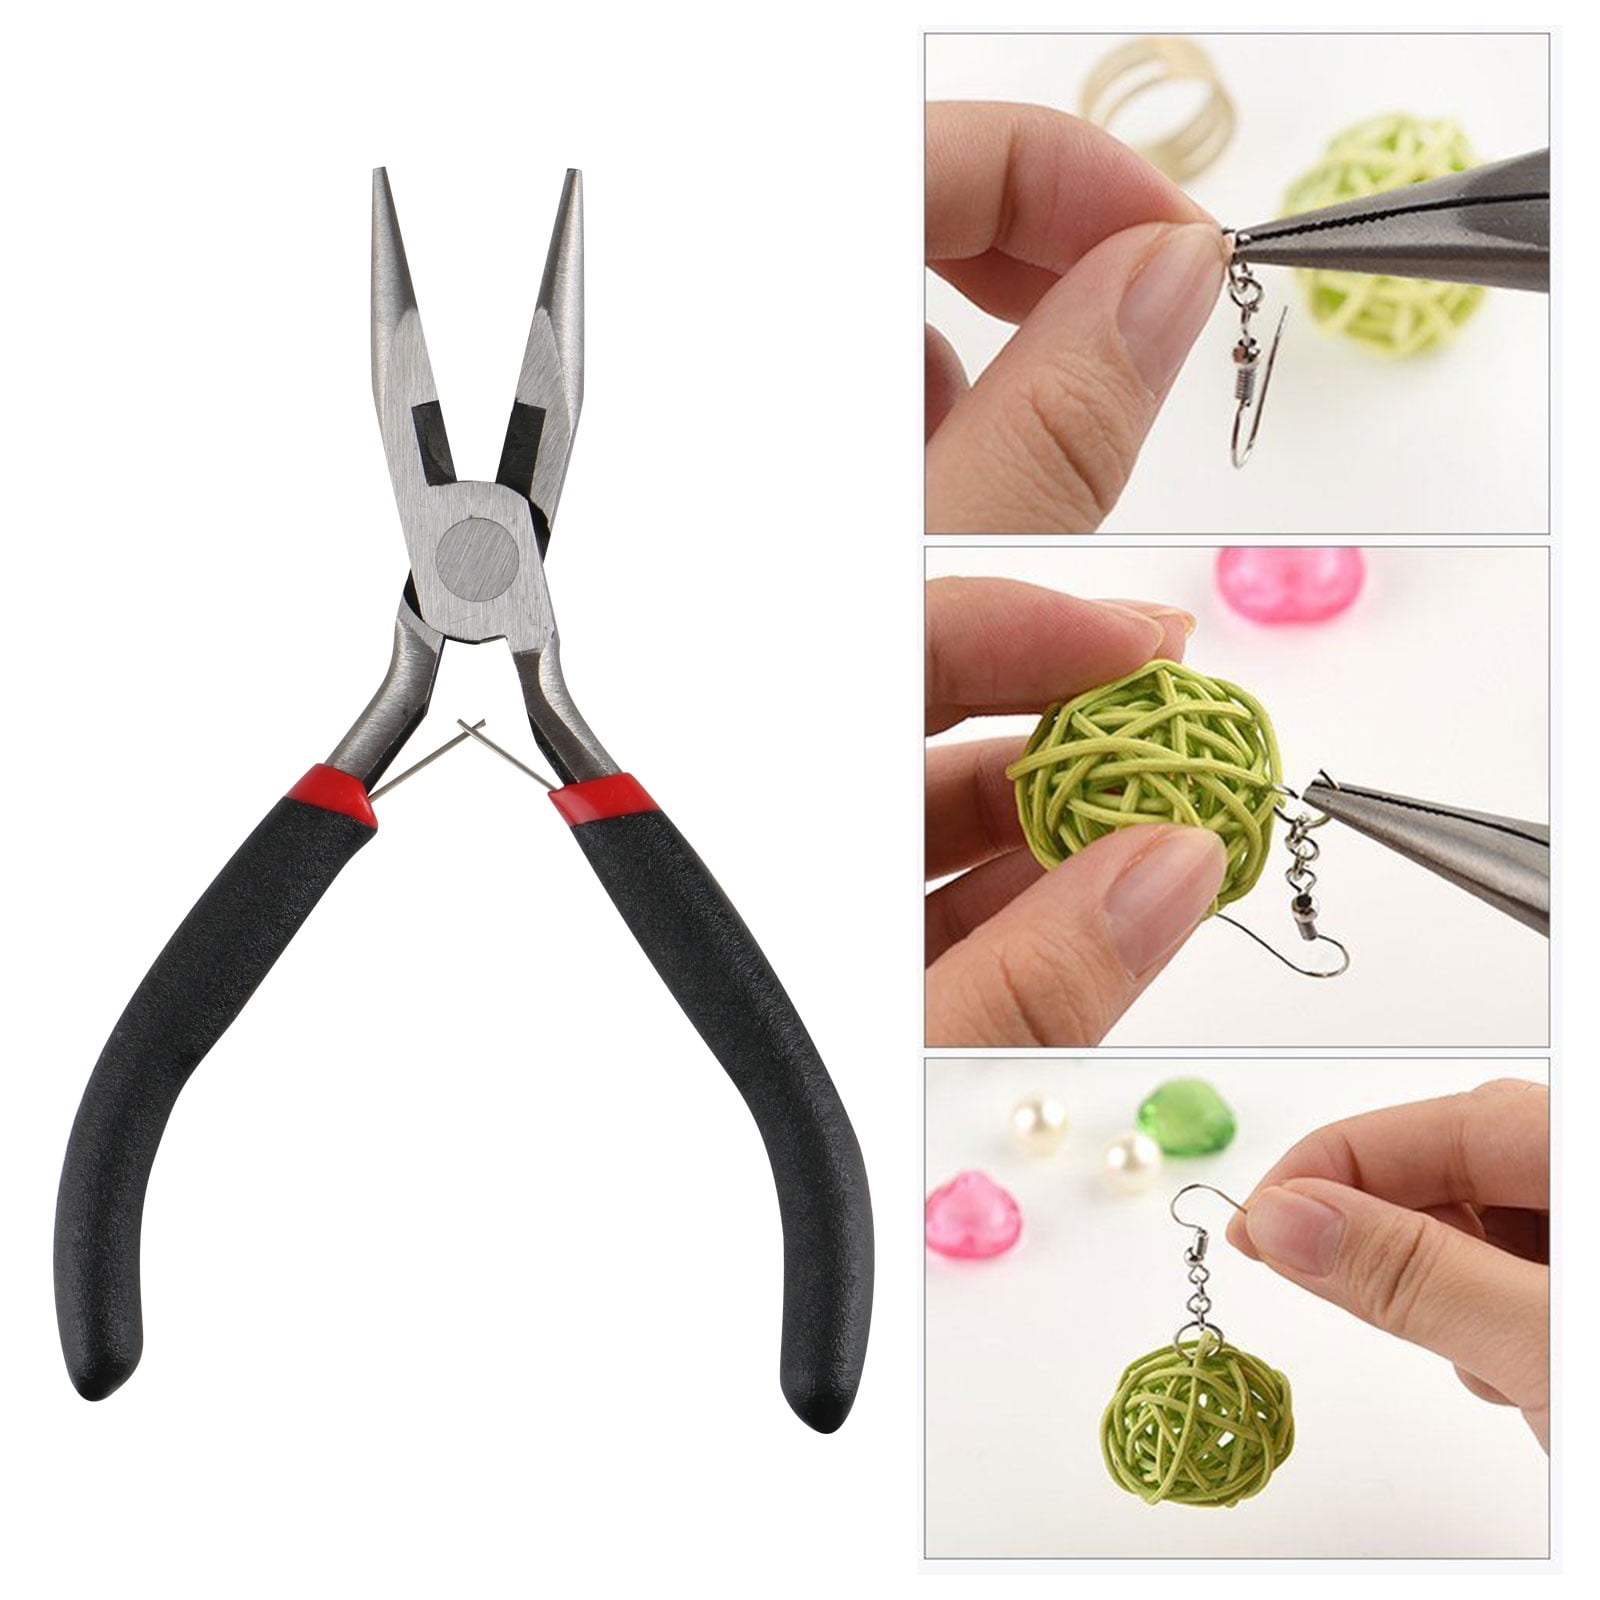 INDIVSHOW Jewelry Repair Kit with Jewelry Pliers, Bead Plate, For